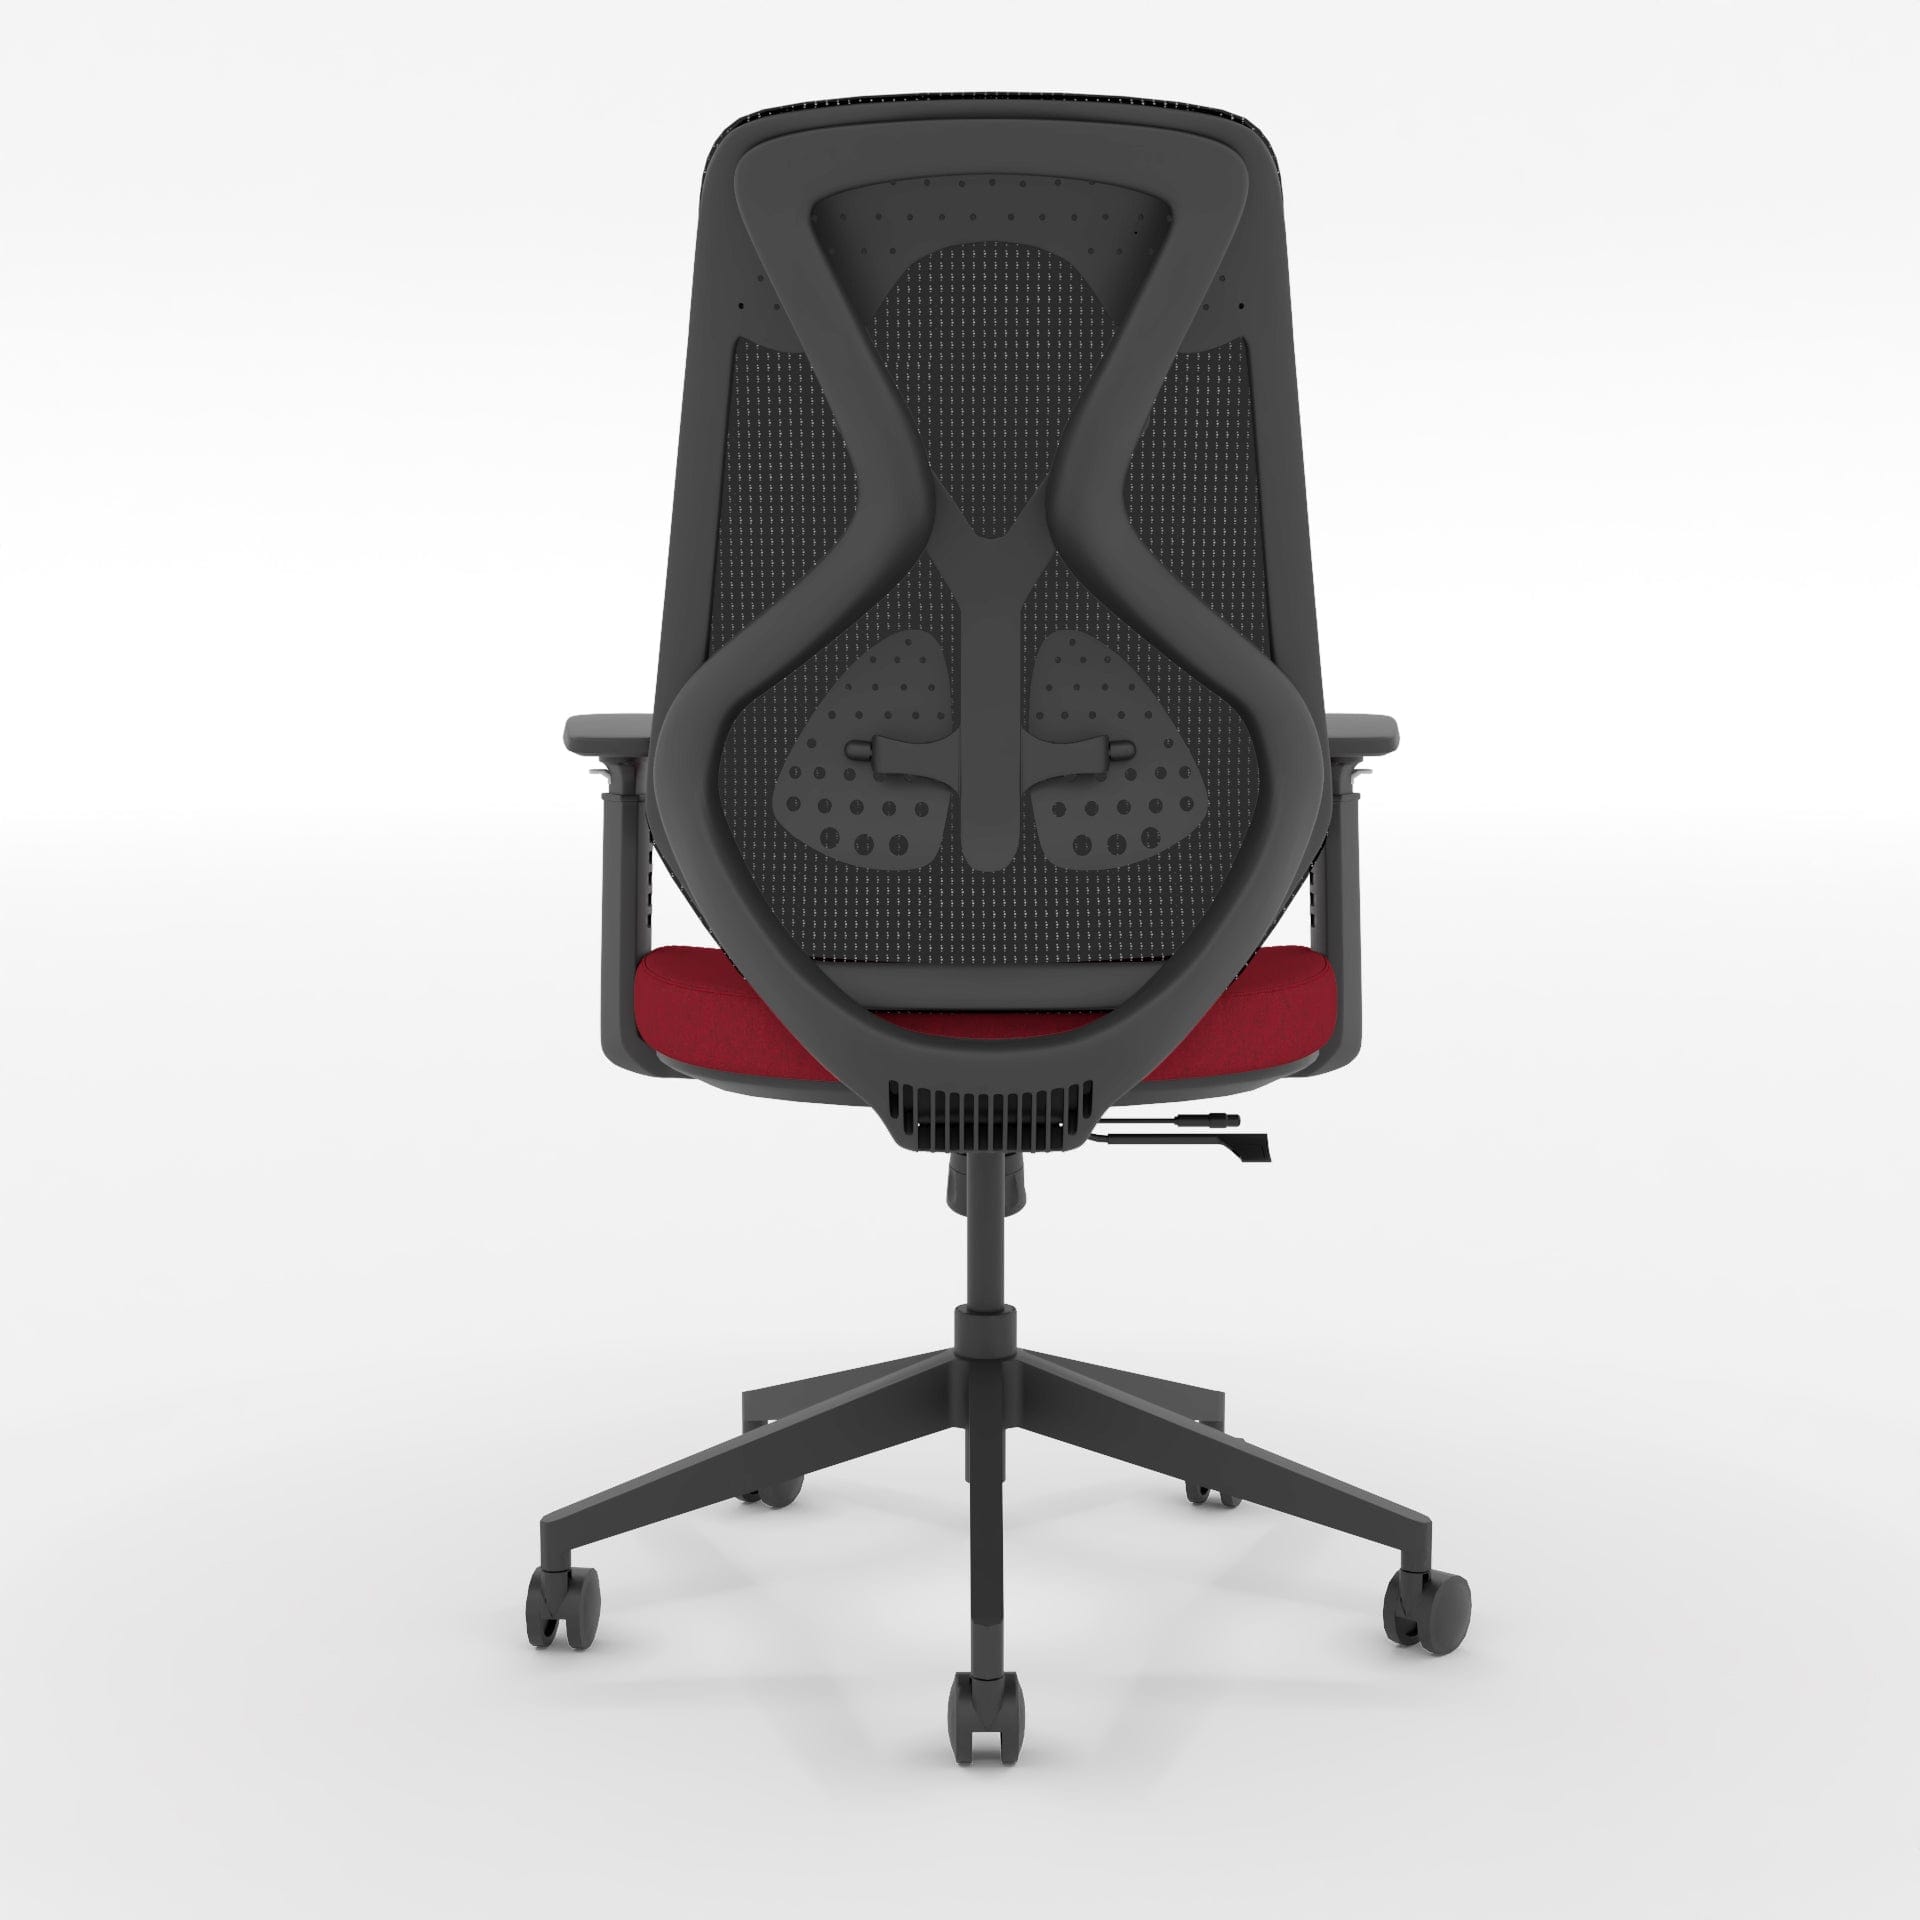 Ergonomic Chair | Office Chair with Adjustable Arms Porvata Office Chairs